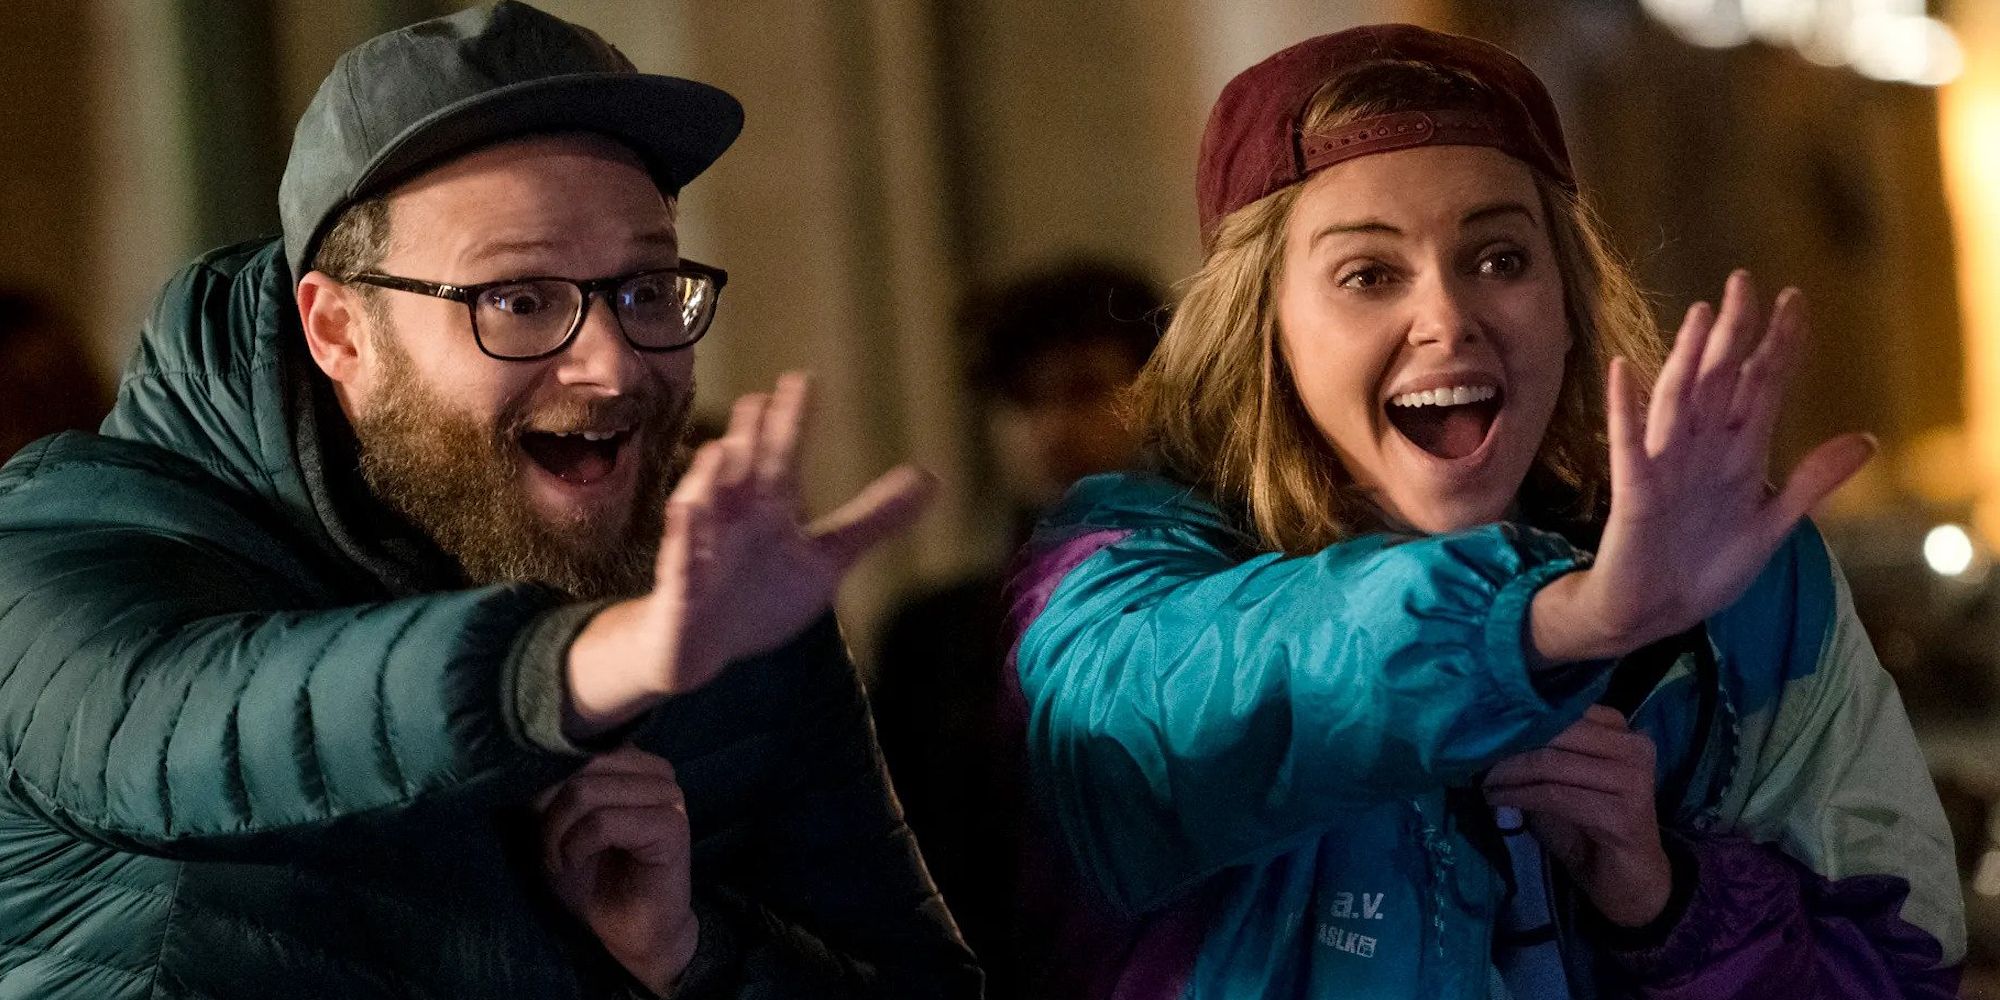 Fred and Charlotte hold their hands up for a high five while smiling in Long Shot (2019).